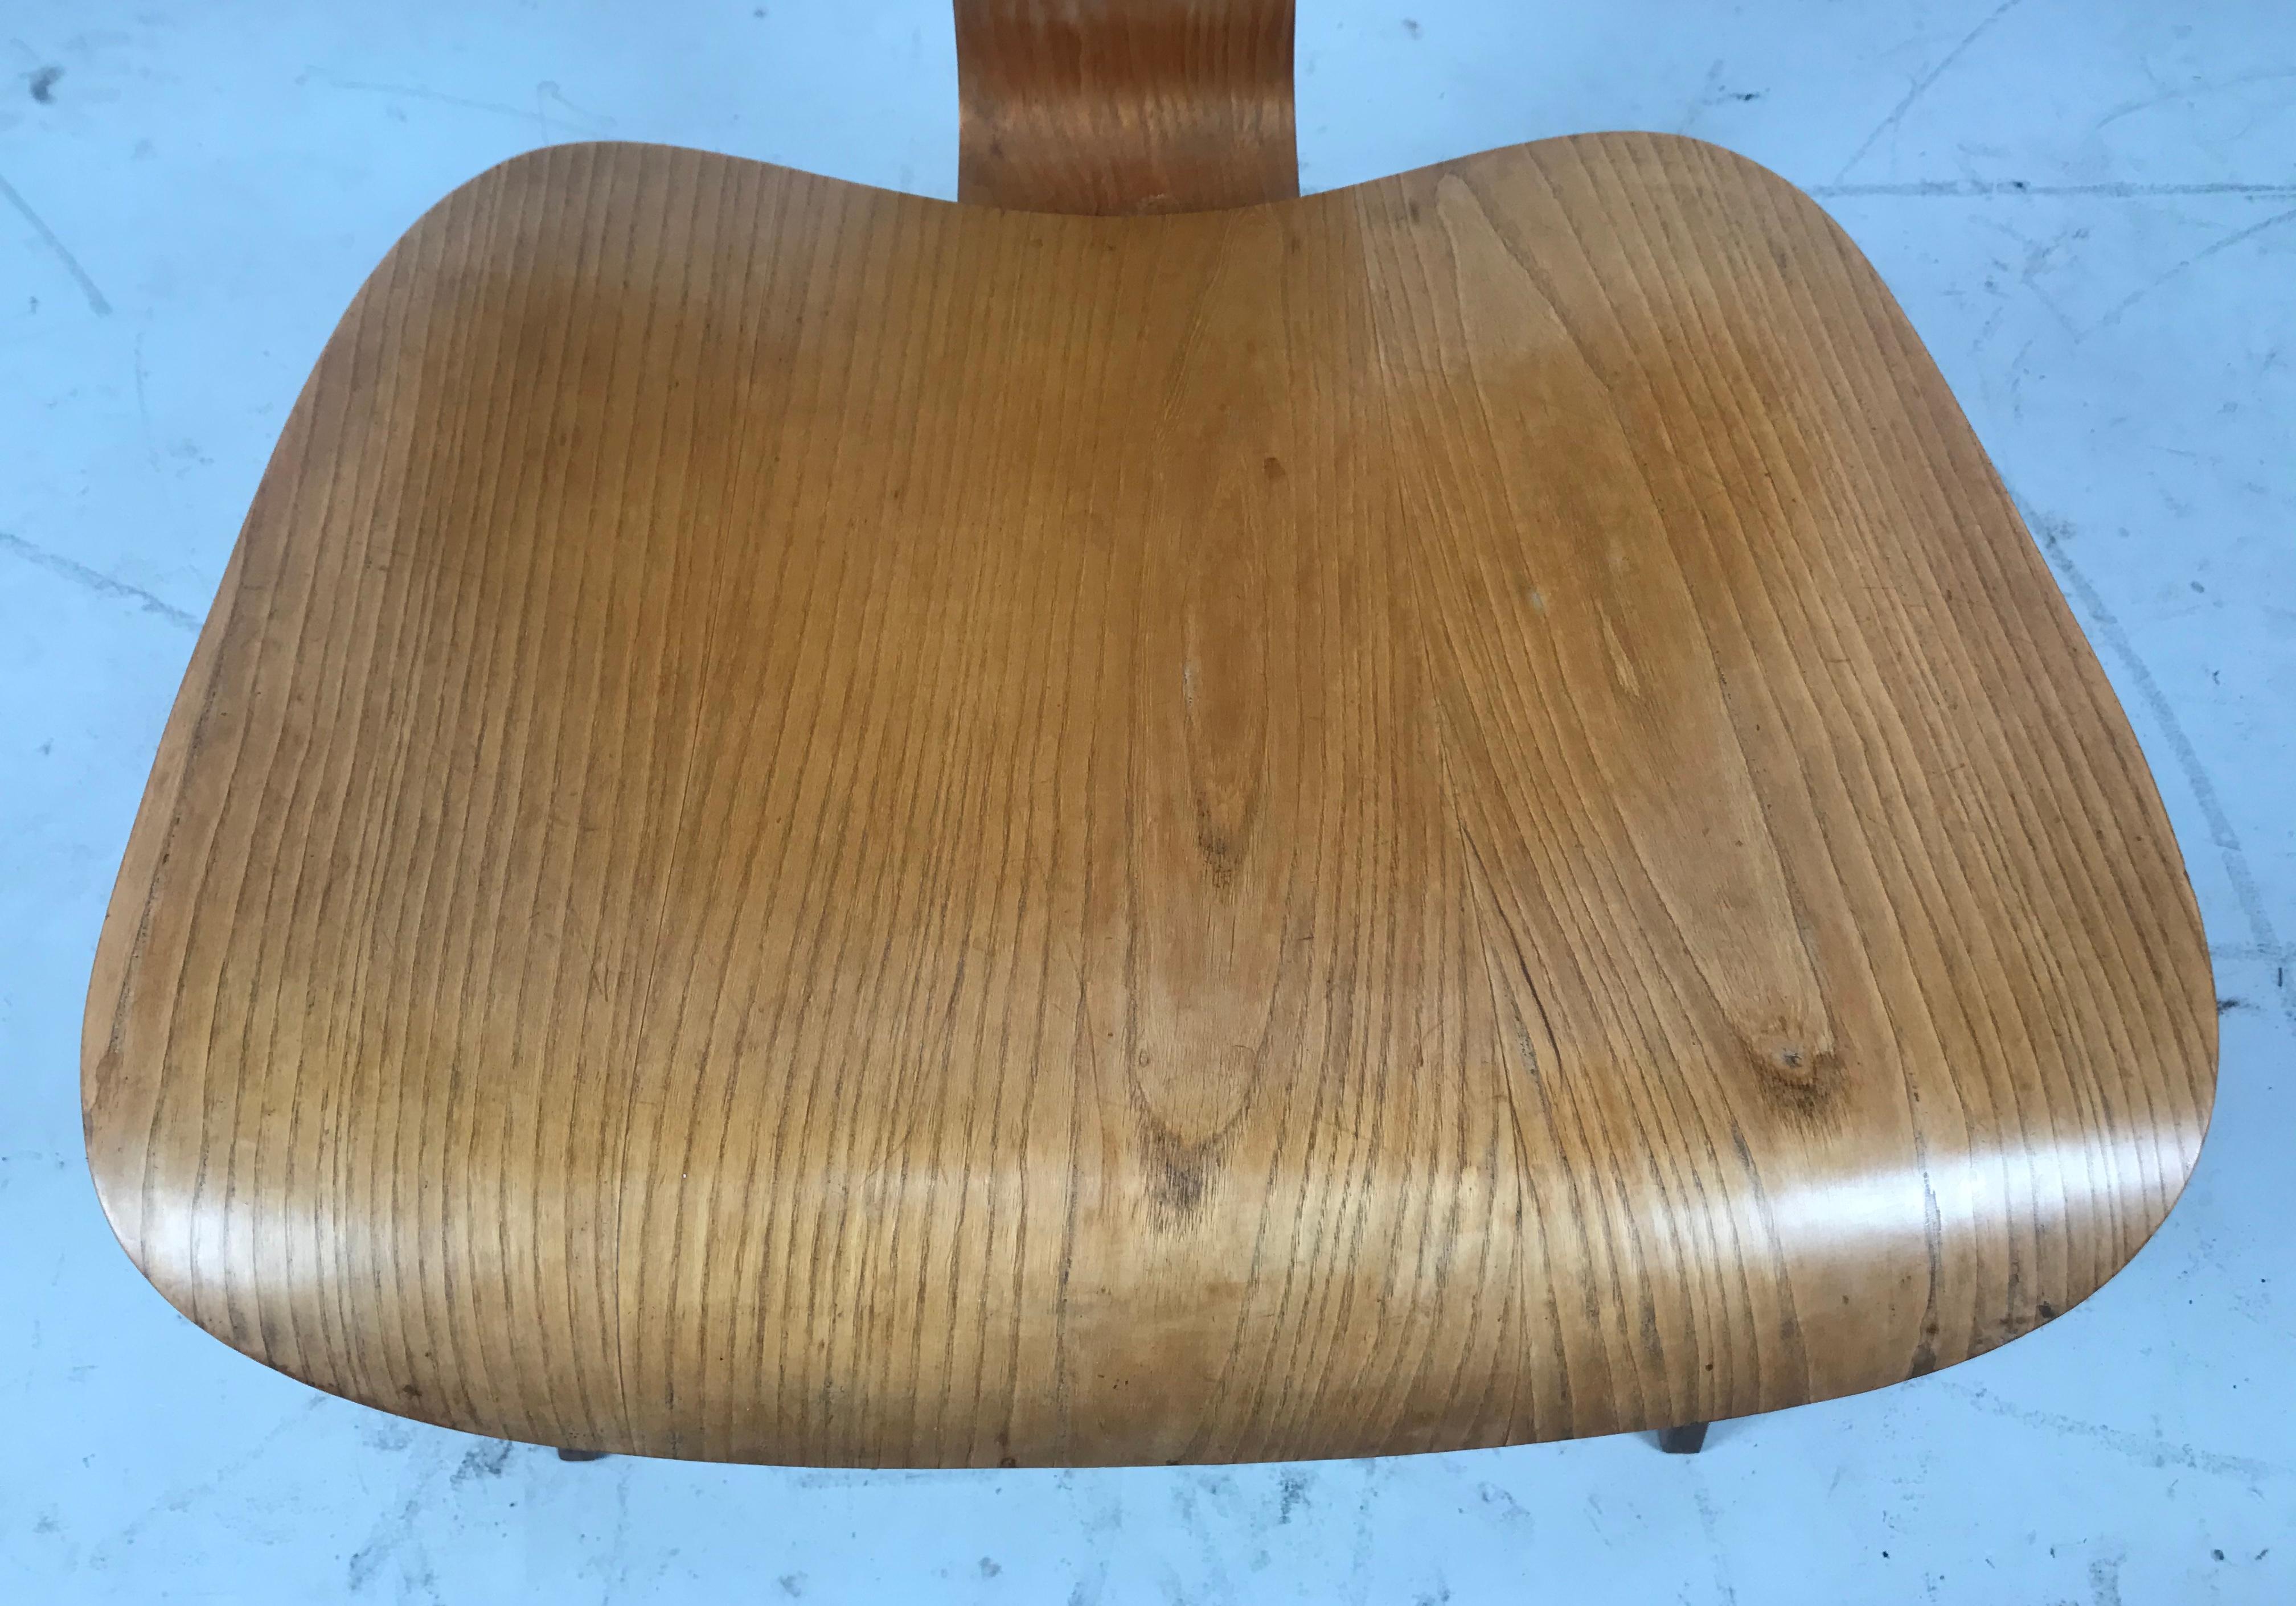 Classic First Year Production Eames LCW, Evans Label 5 2 5 Screw Configuration im Zustand „Gut“ im Angebot in Buffalo, NY